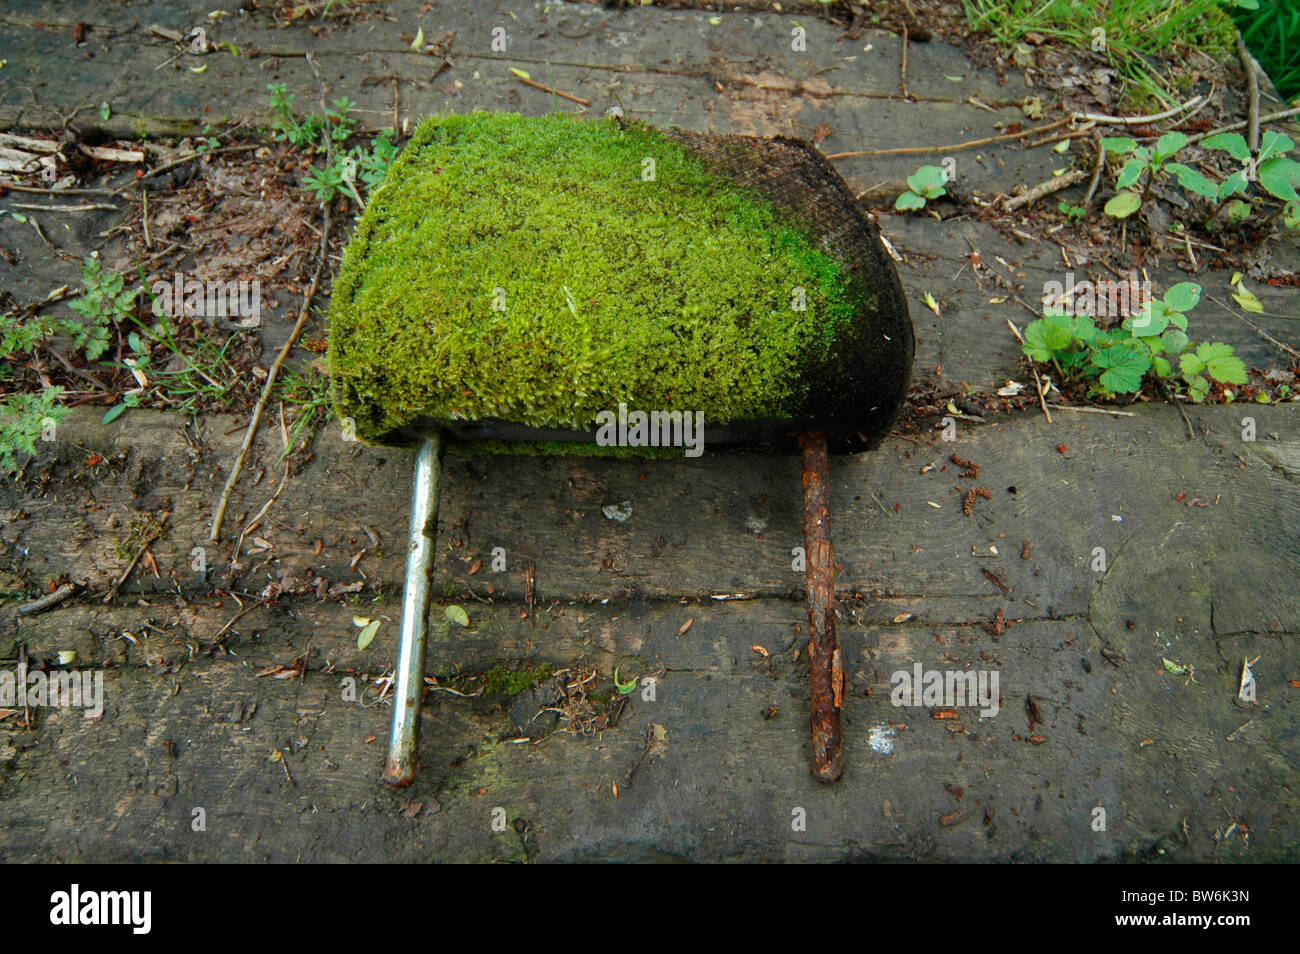 A headrest from a car gradually returning to the earth. Stock Photo